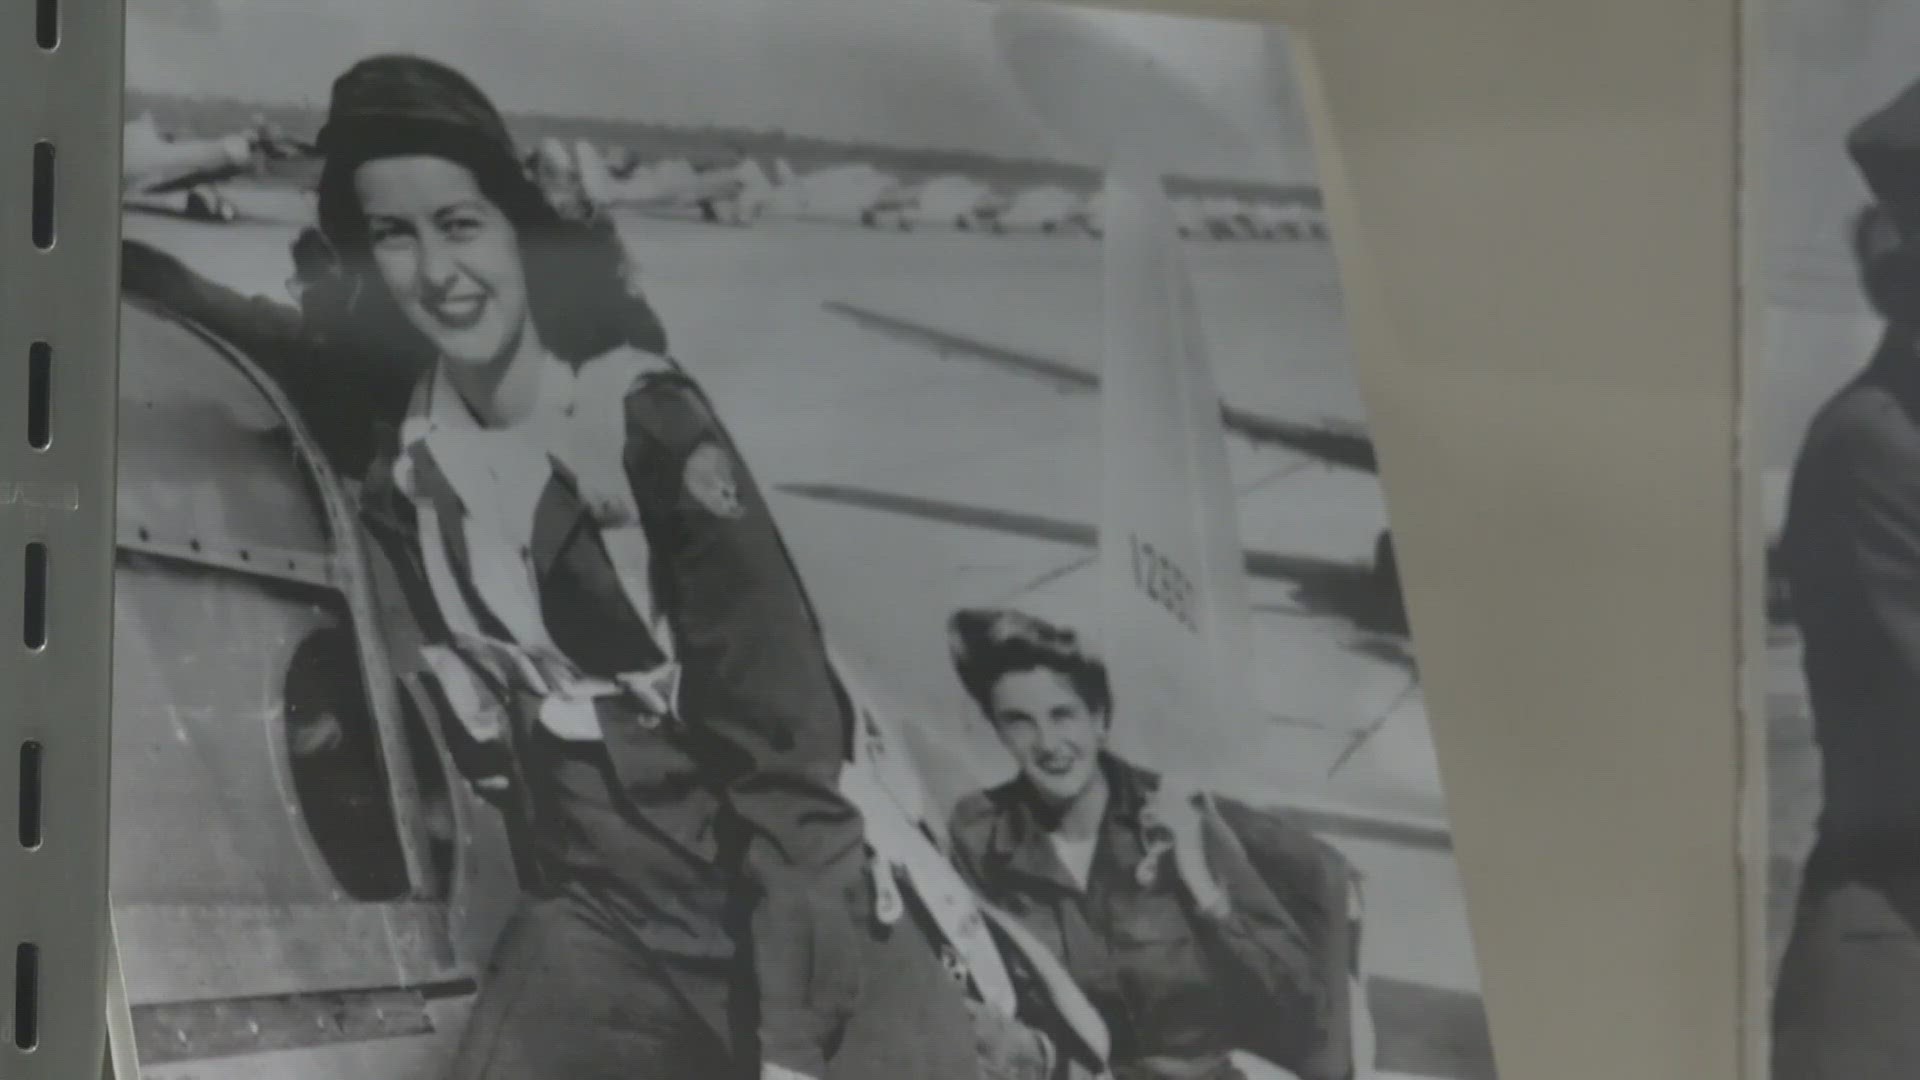 The Women Air Force Service pilots logged 60 million hours flying military aircraft during World War II.